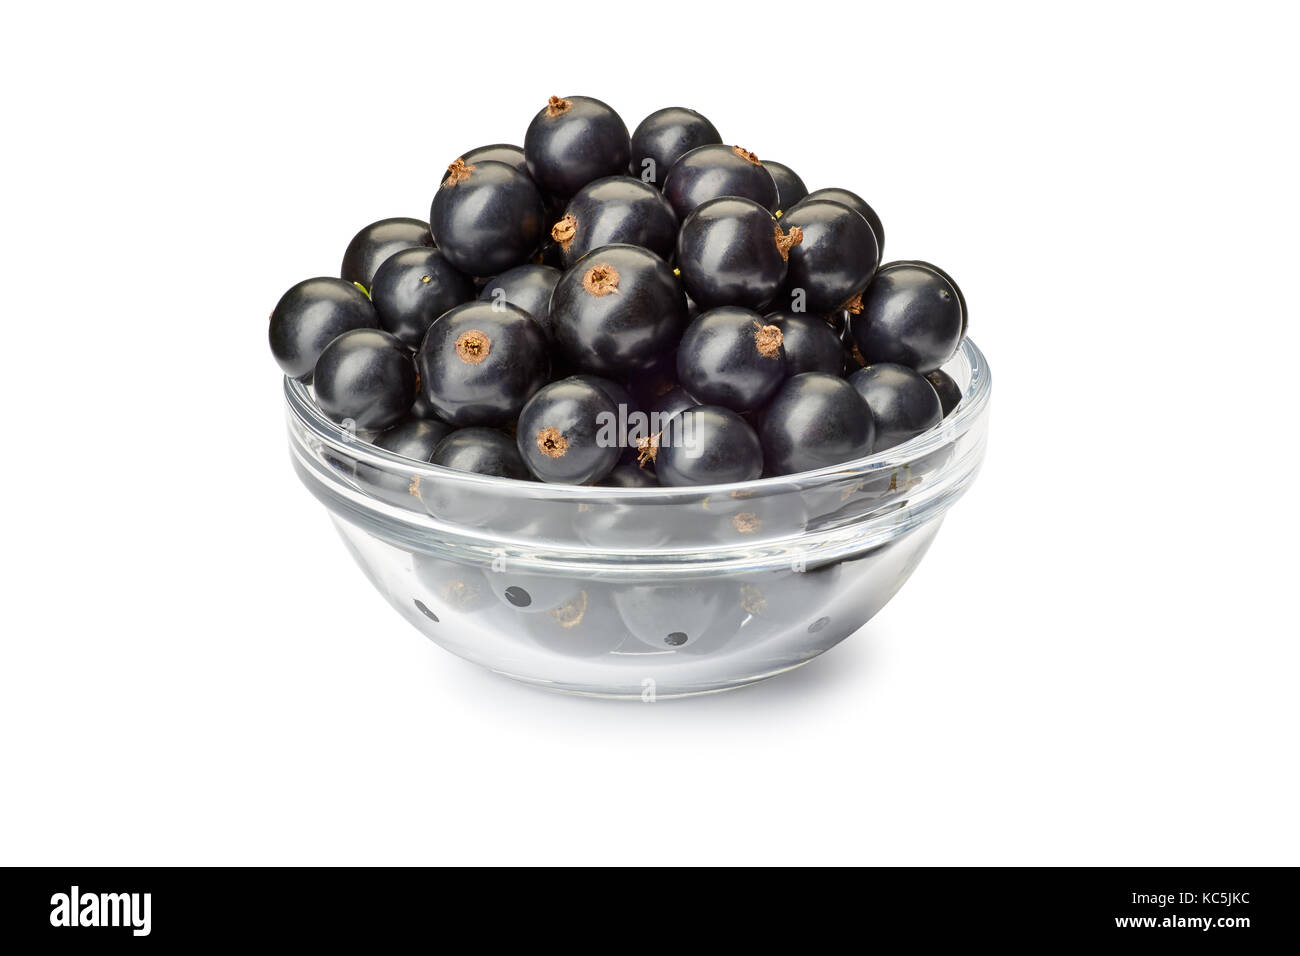 Bowl with black currant berries on white Stock Photo